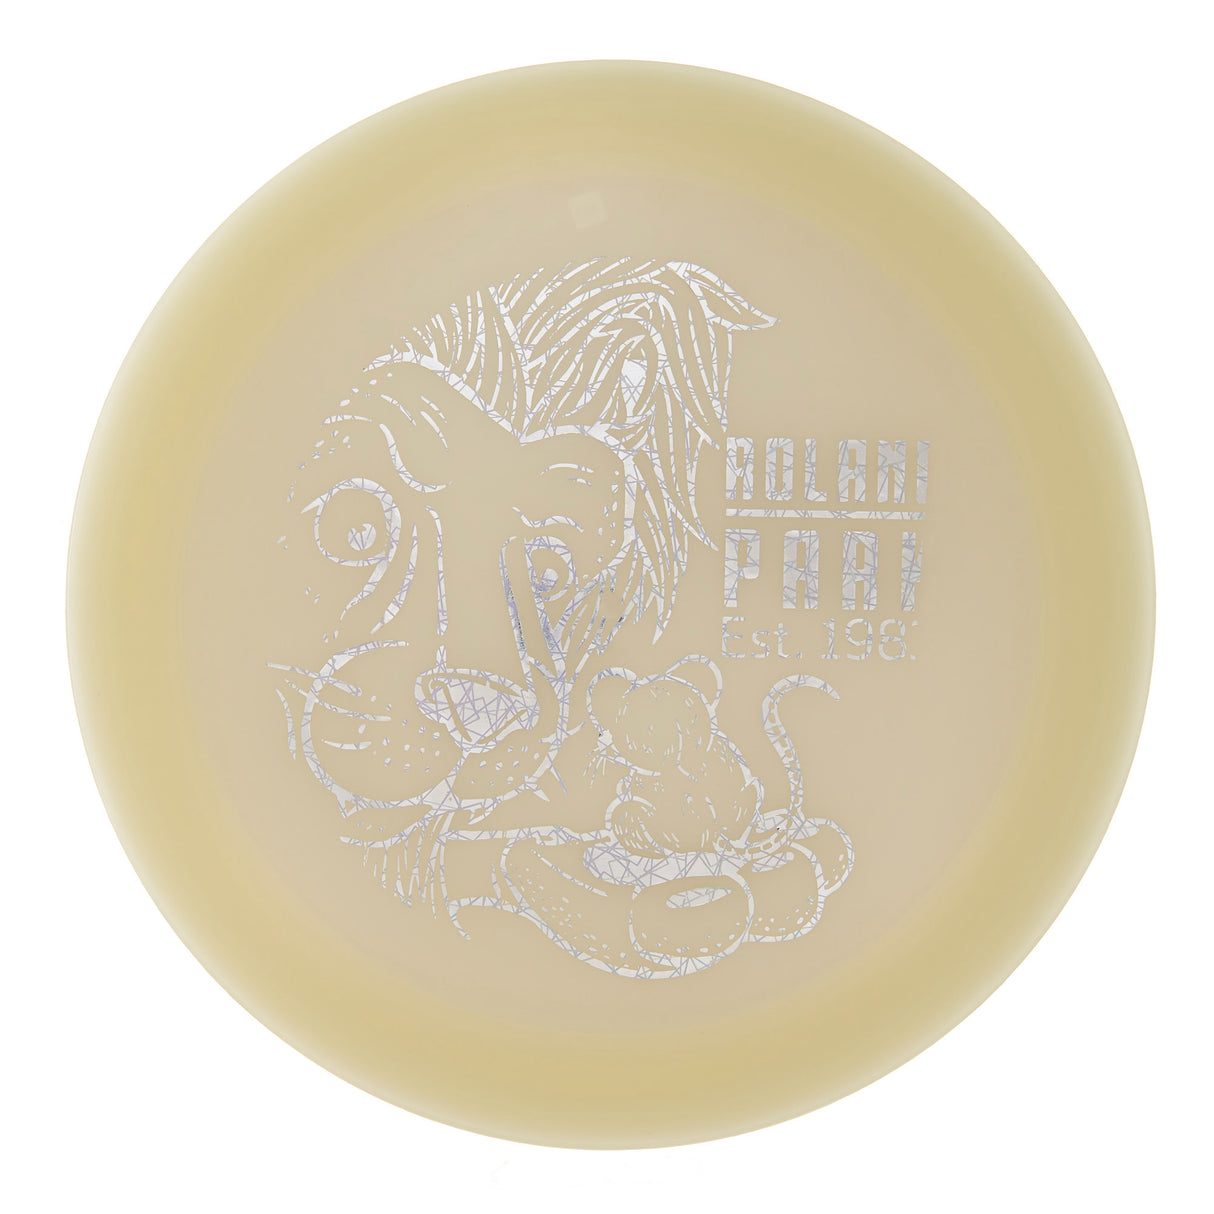 Thought Space Athletics Synapse - 2023 Roland Park Fundraiser Glow 176g | Style 0002